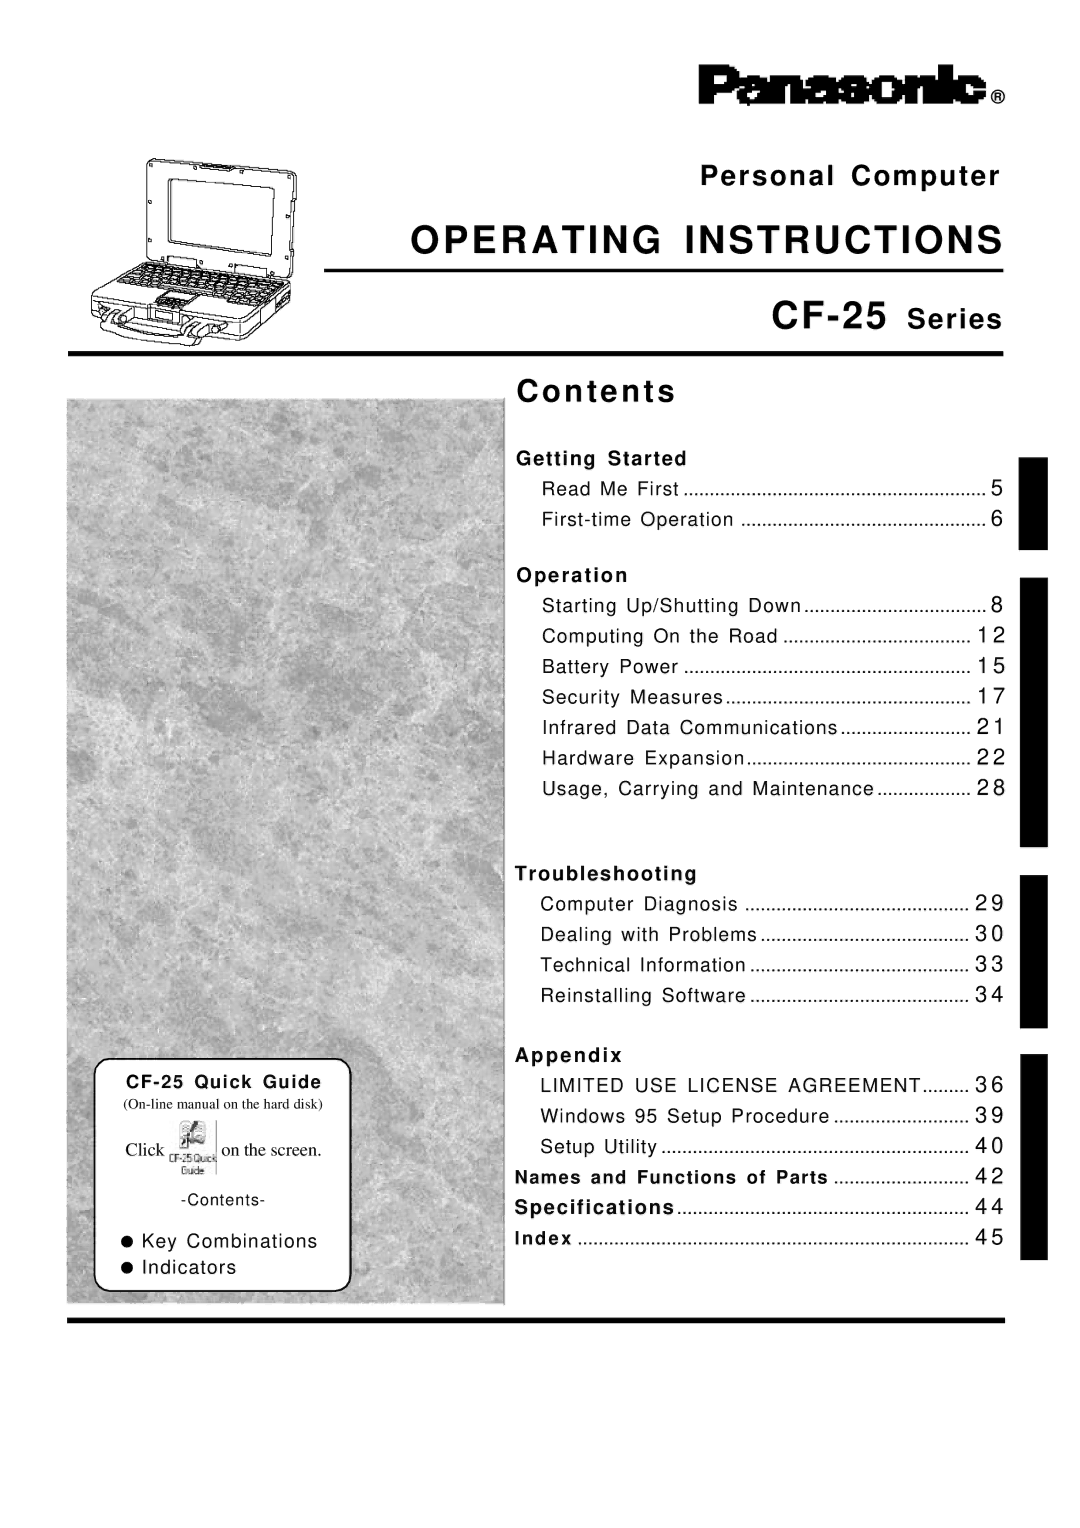 Panasonic operating instructions CF-25 Quick Guide, Names and Functions of Parts 